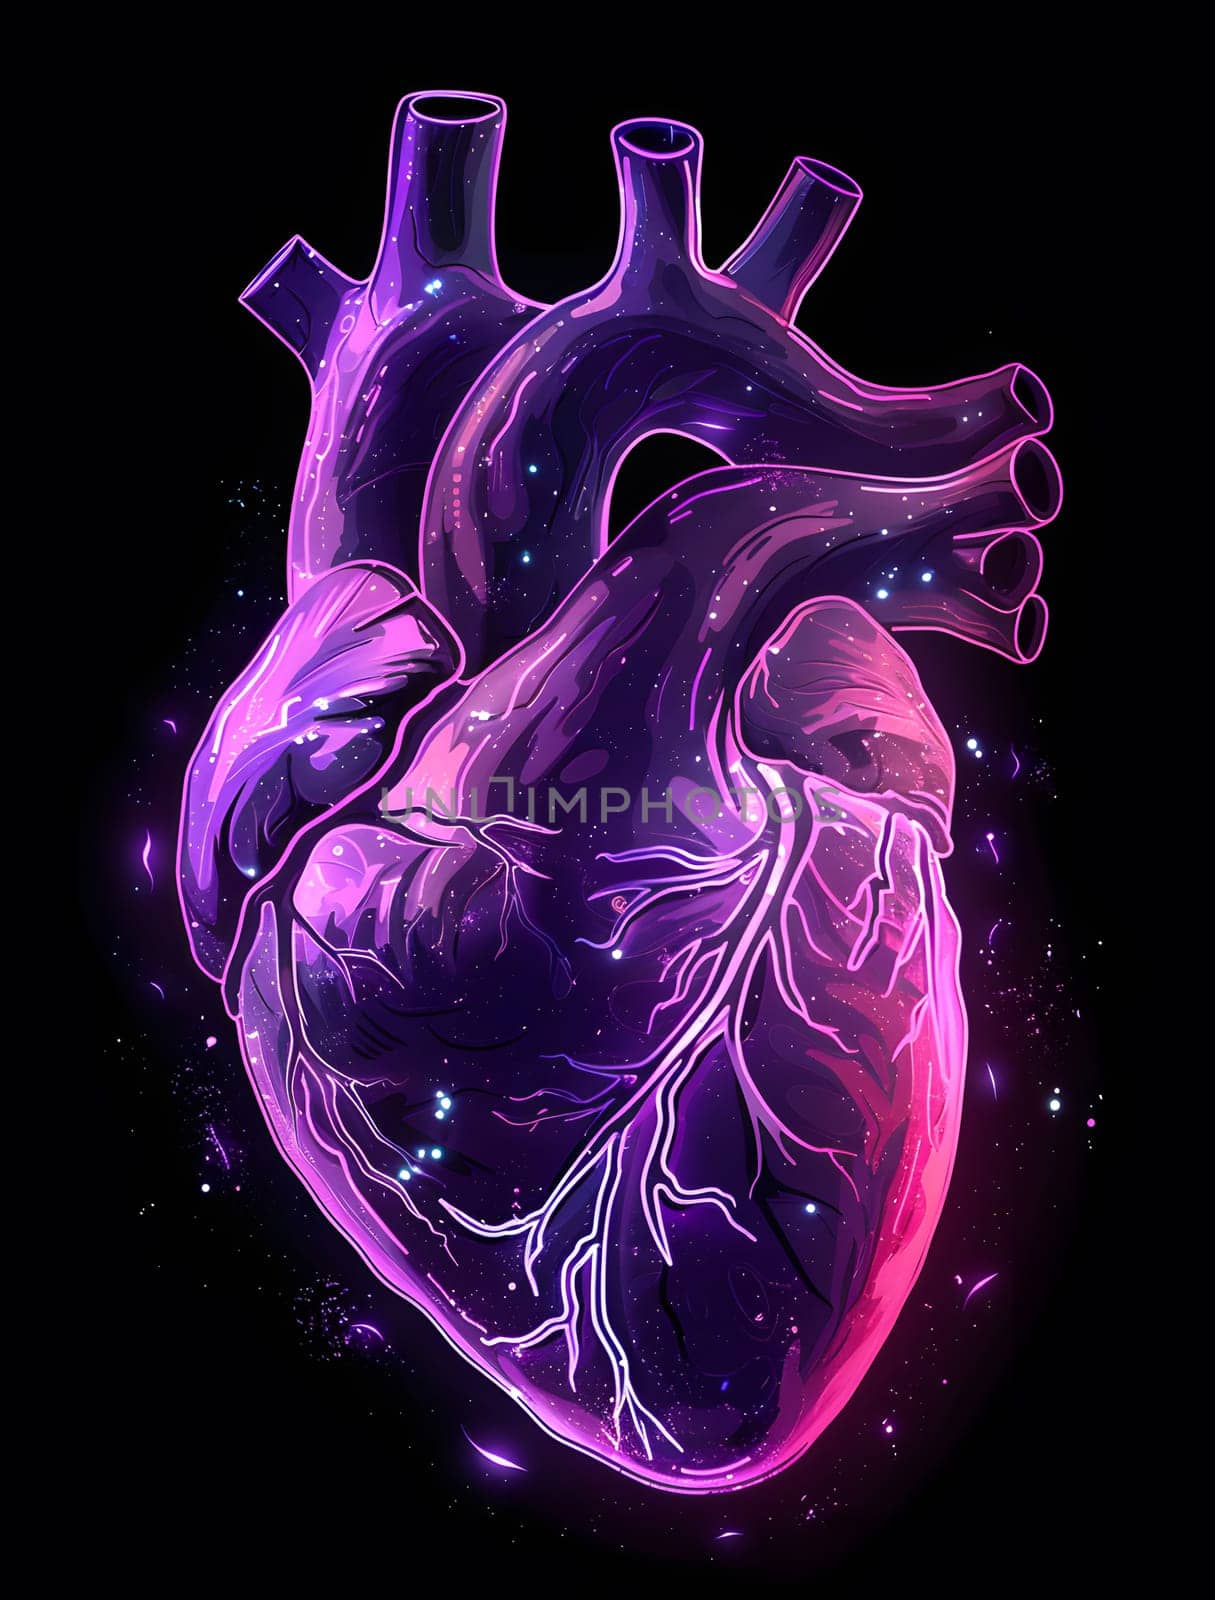 A vibrant purple human heart, resembling liquid art in shades of magenta and violet, floating on a black background like a fluid organism